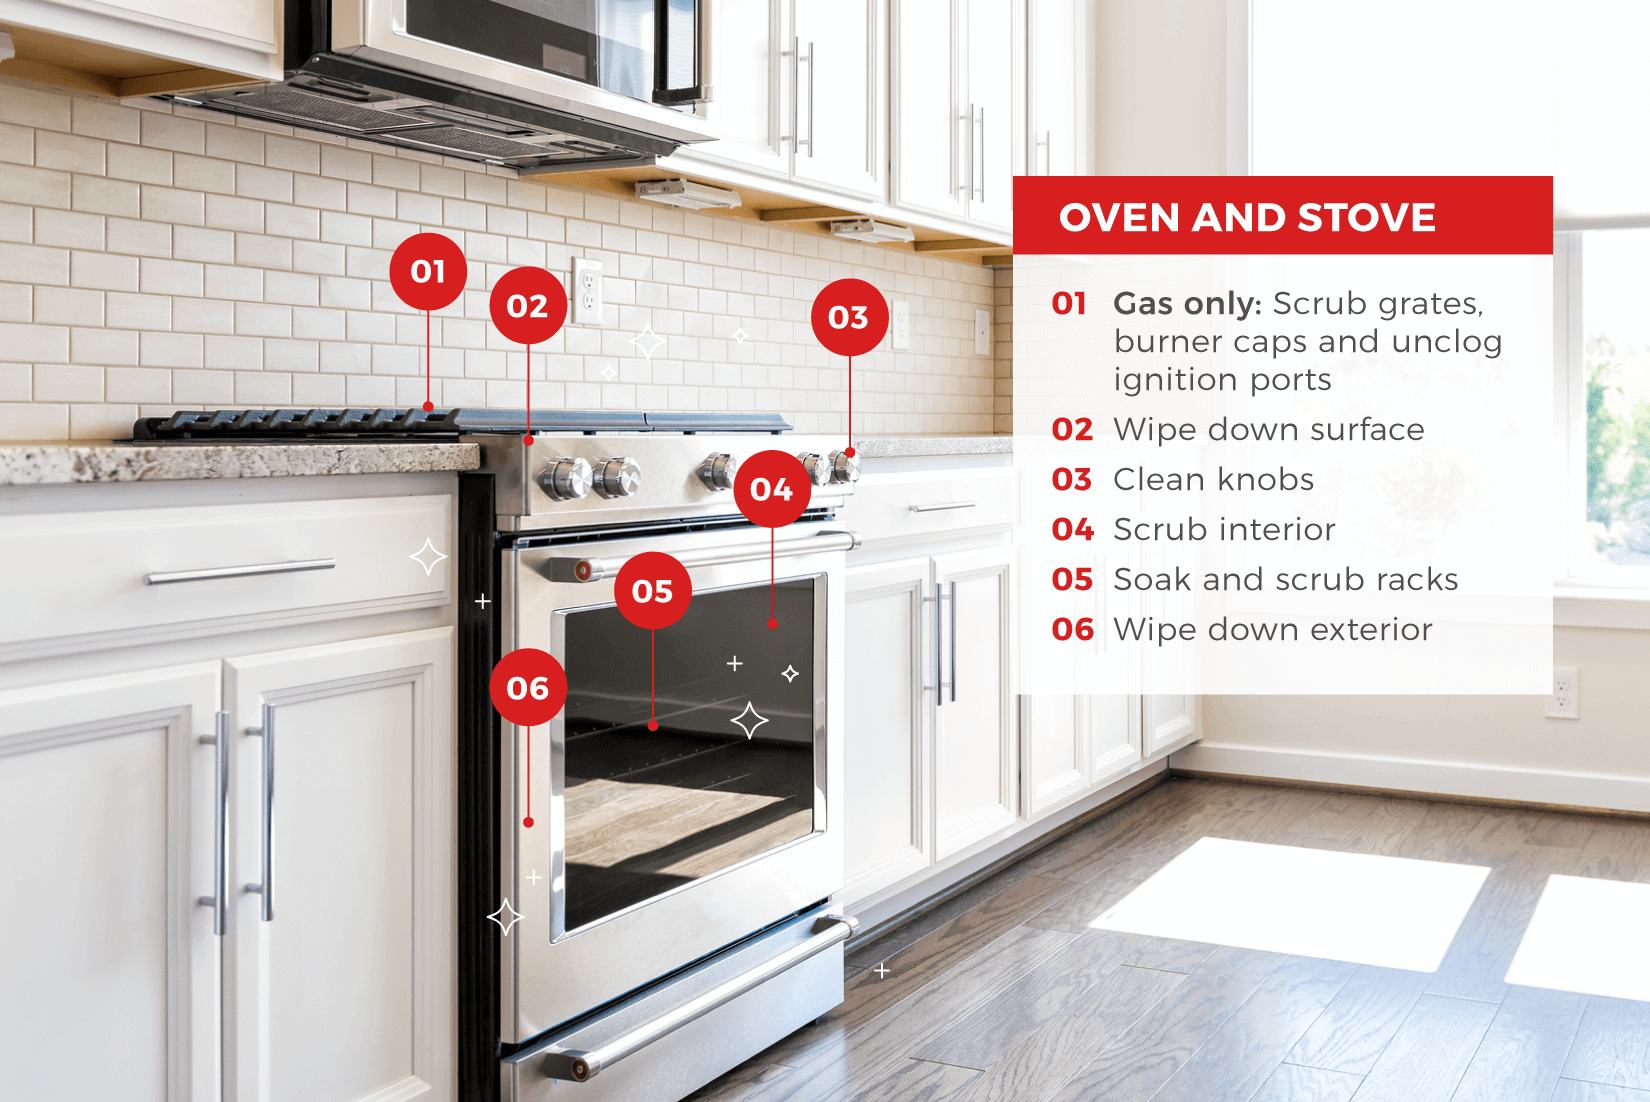 Oven and stove with written instructions on how to clean each labeled part